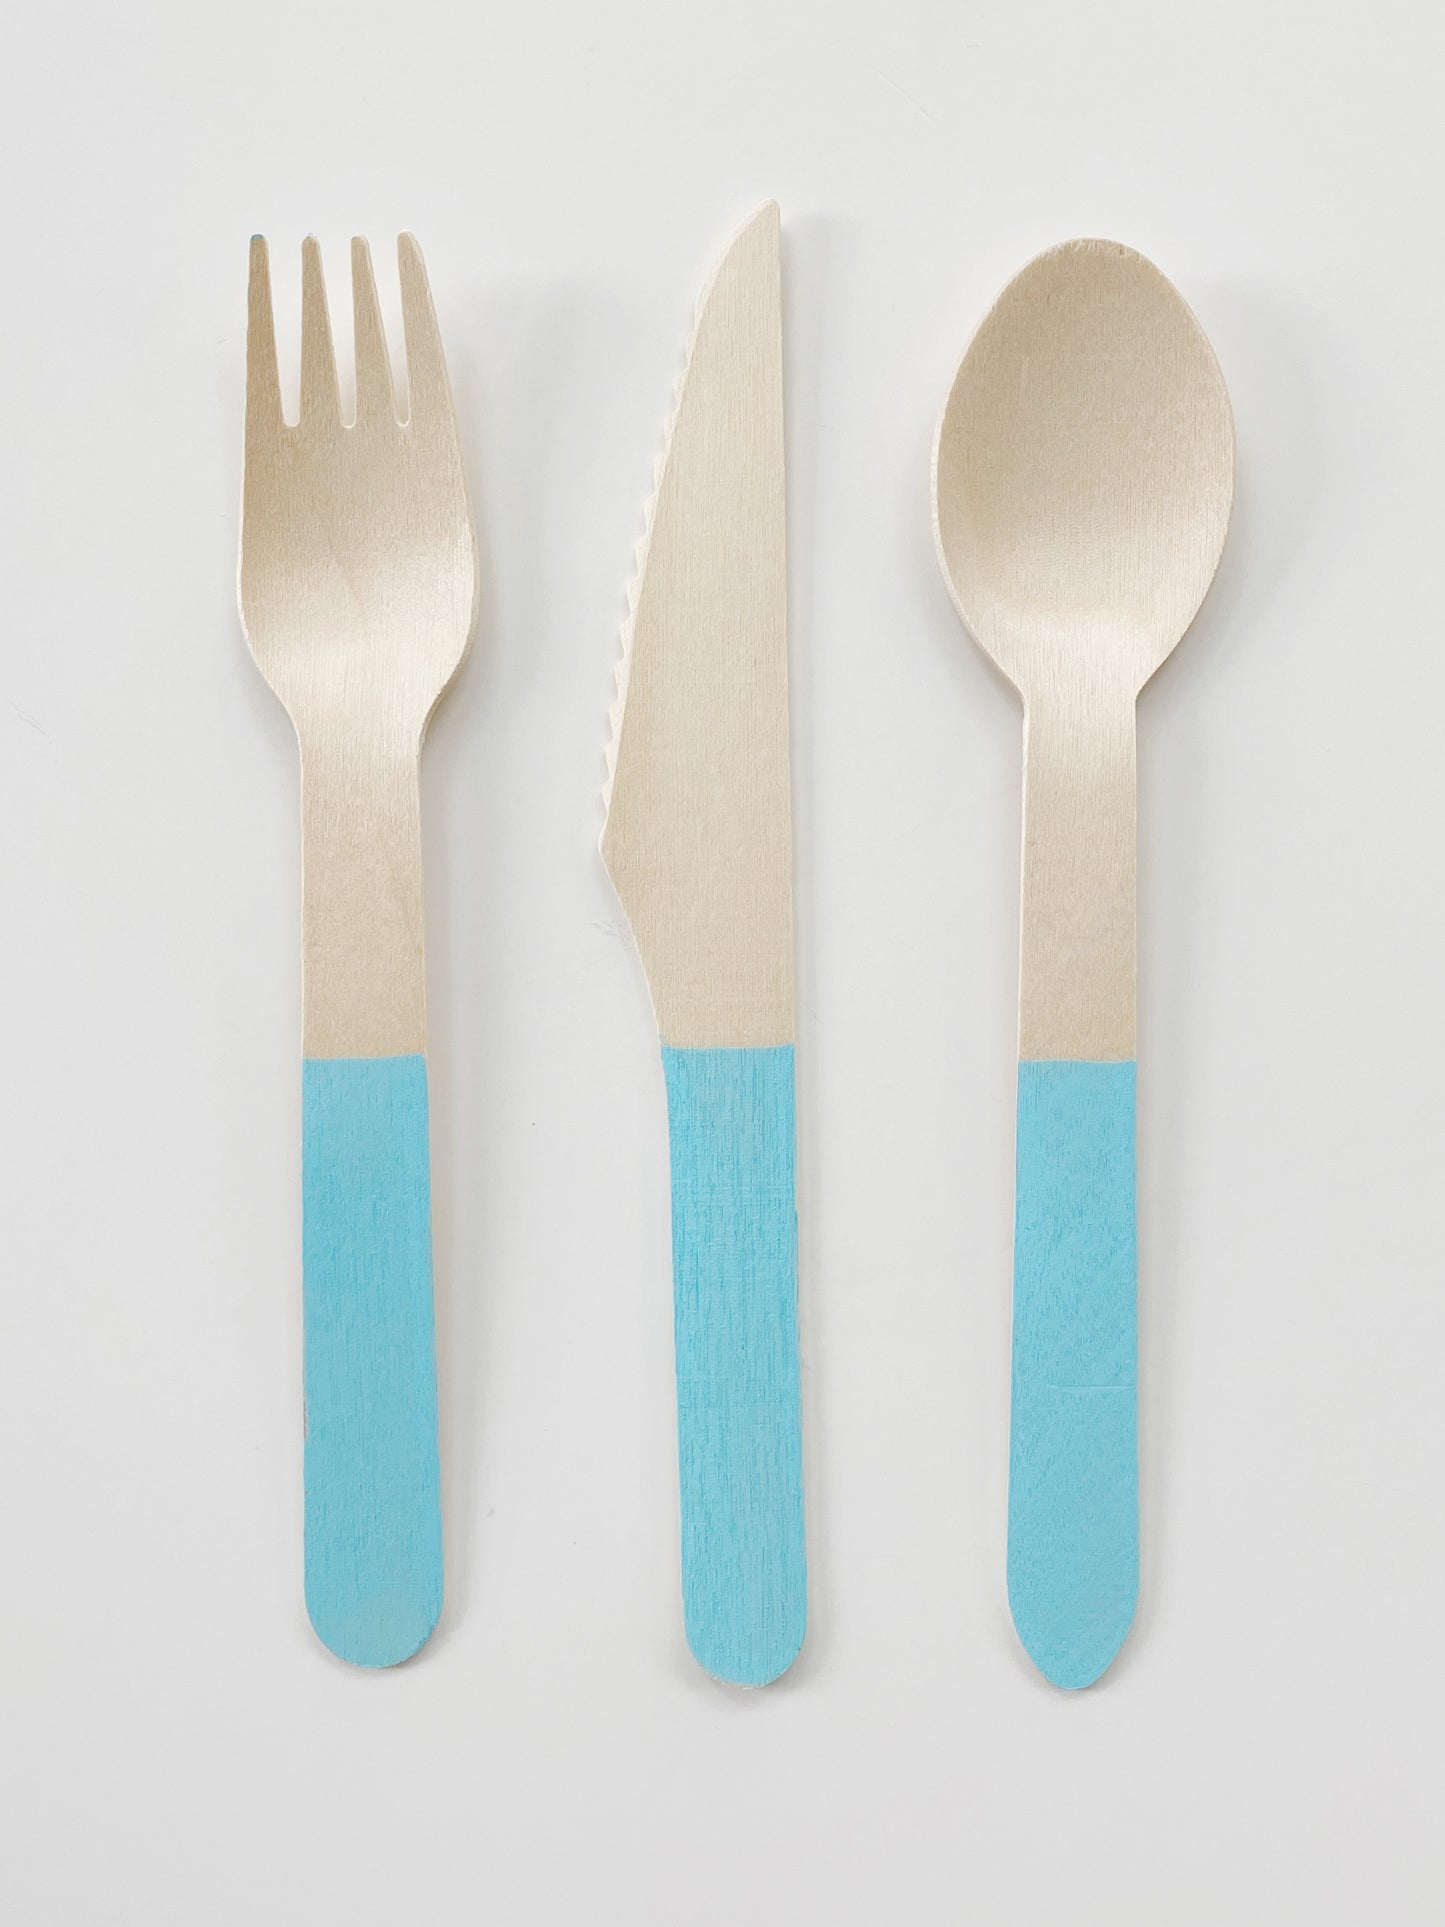 Blue dipped wooden utensils. This cutlery set includes knives, spoons and forks.